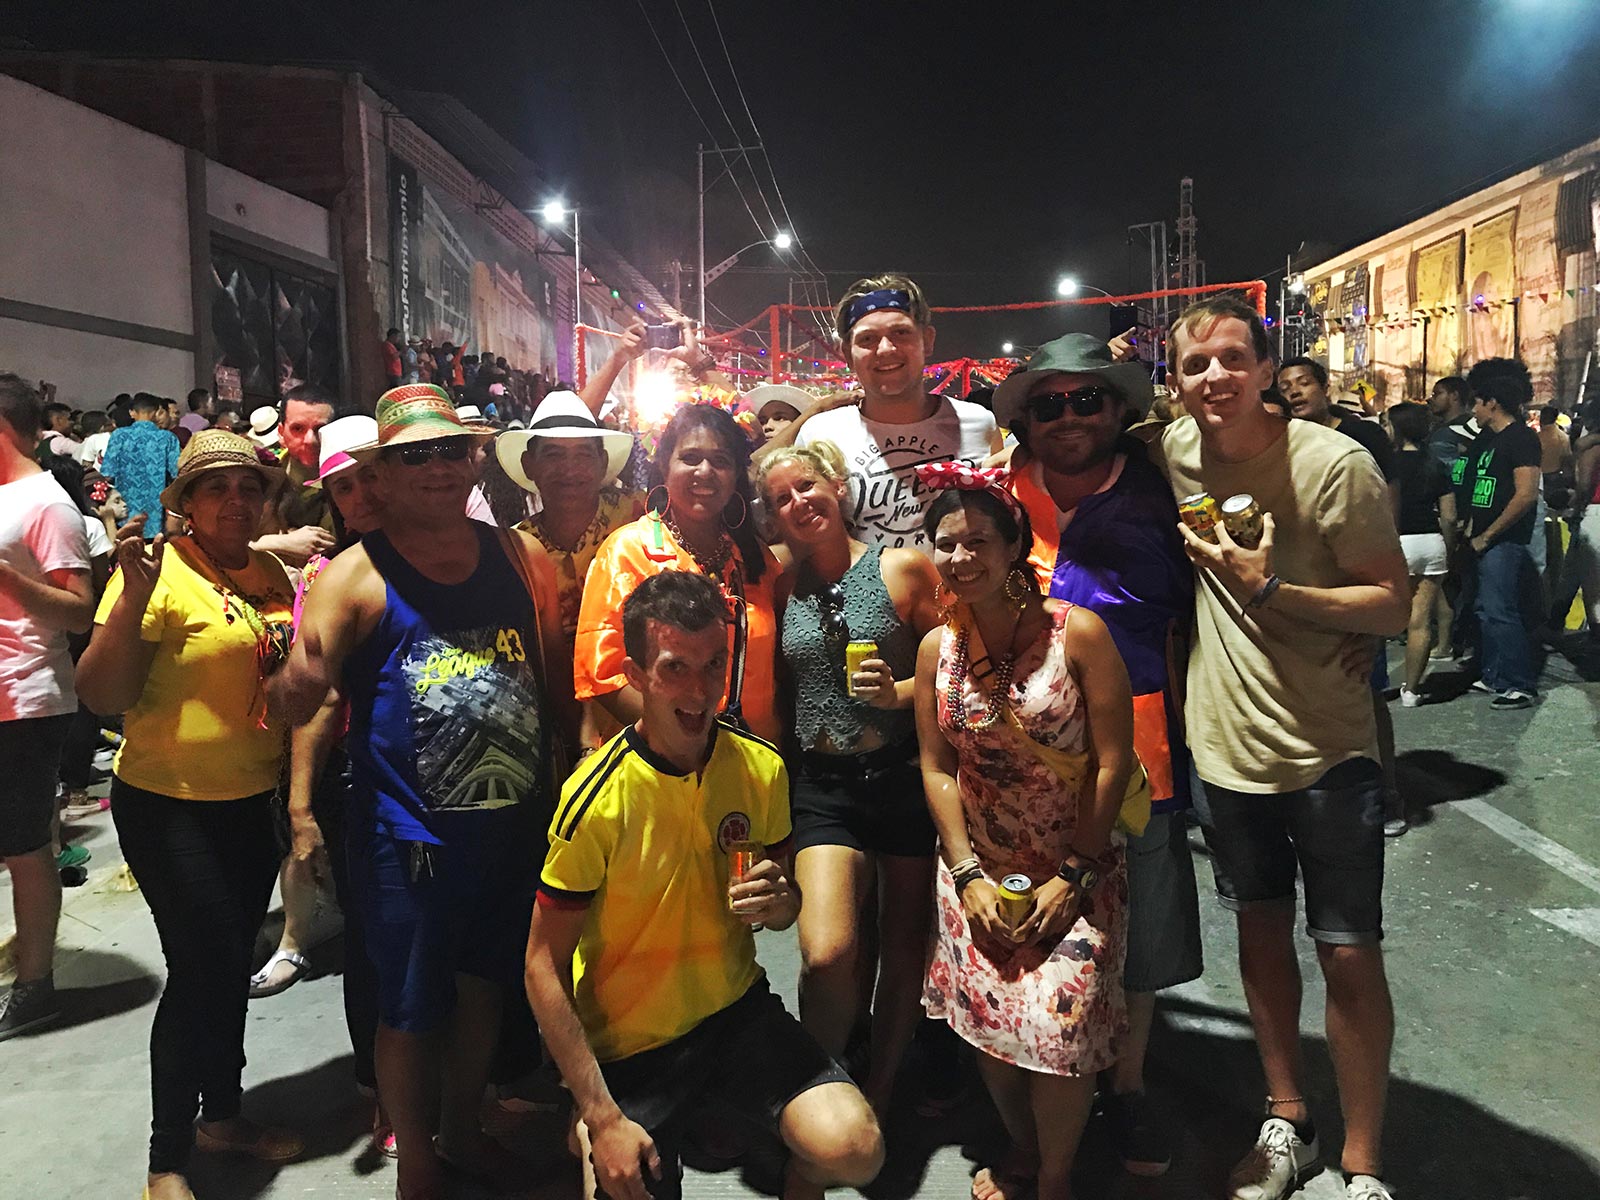 David Simpson and friends at carnival in Barranquilla, Colombia. 4 weeks and Carnival in Colombia